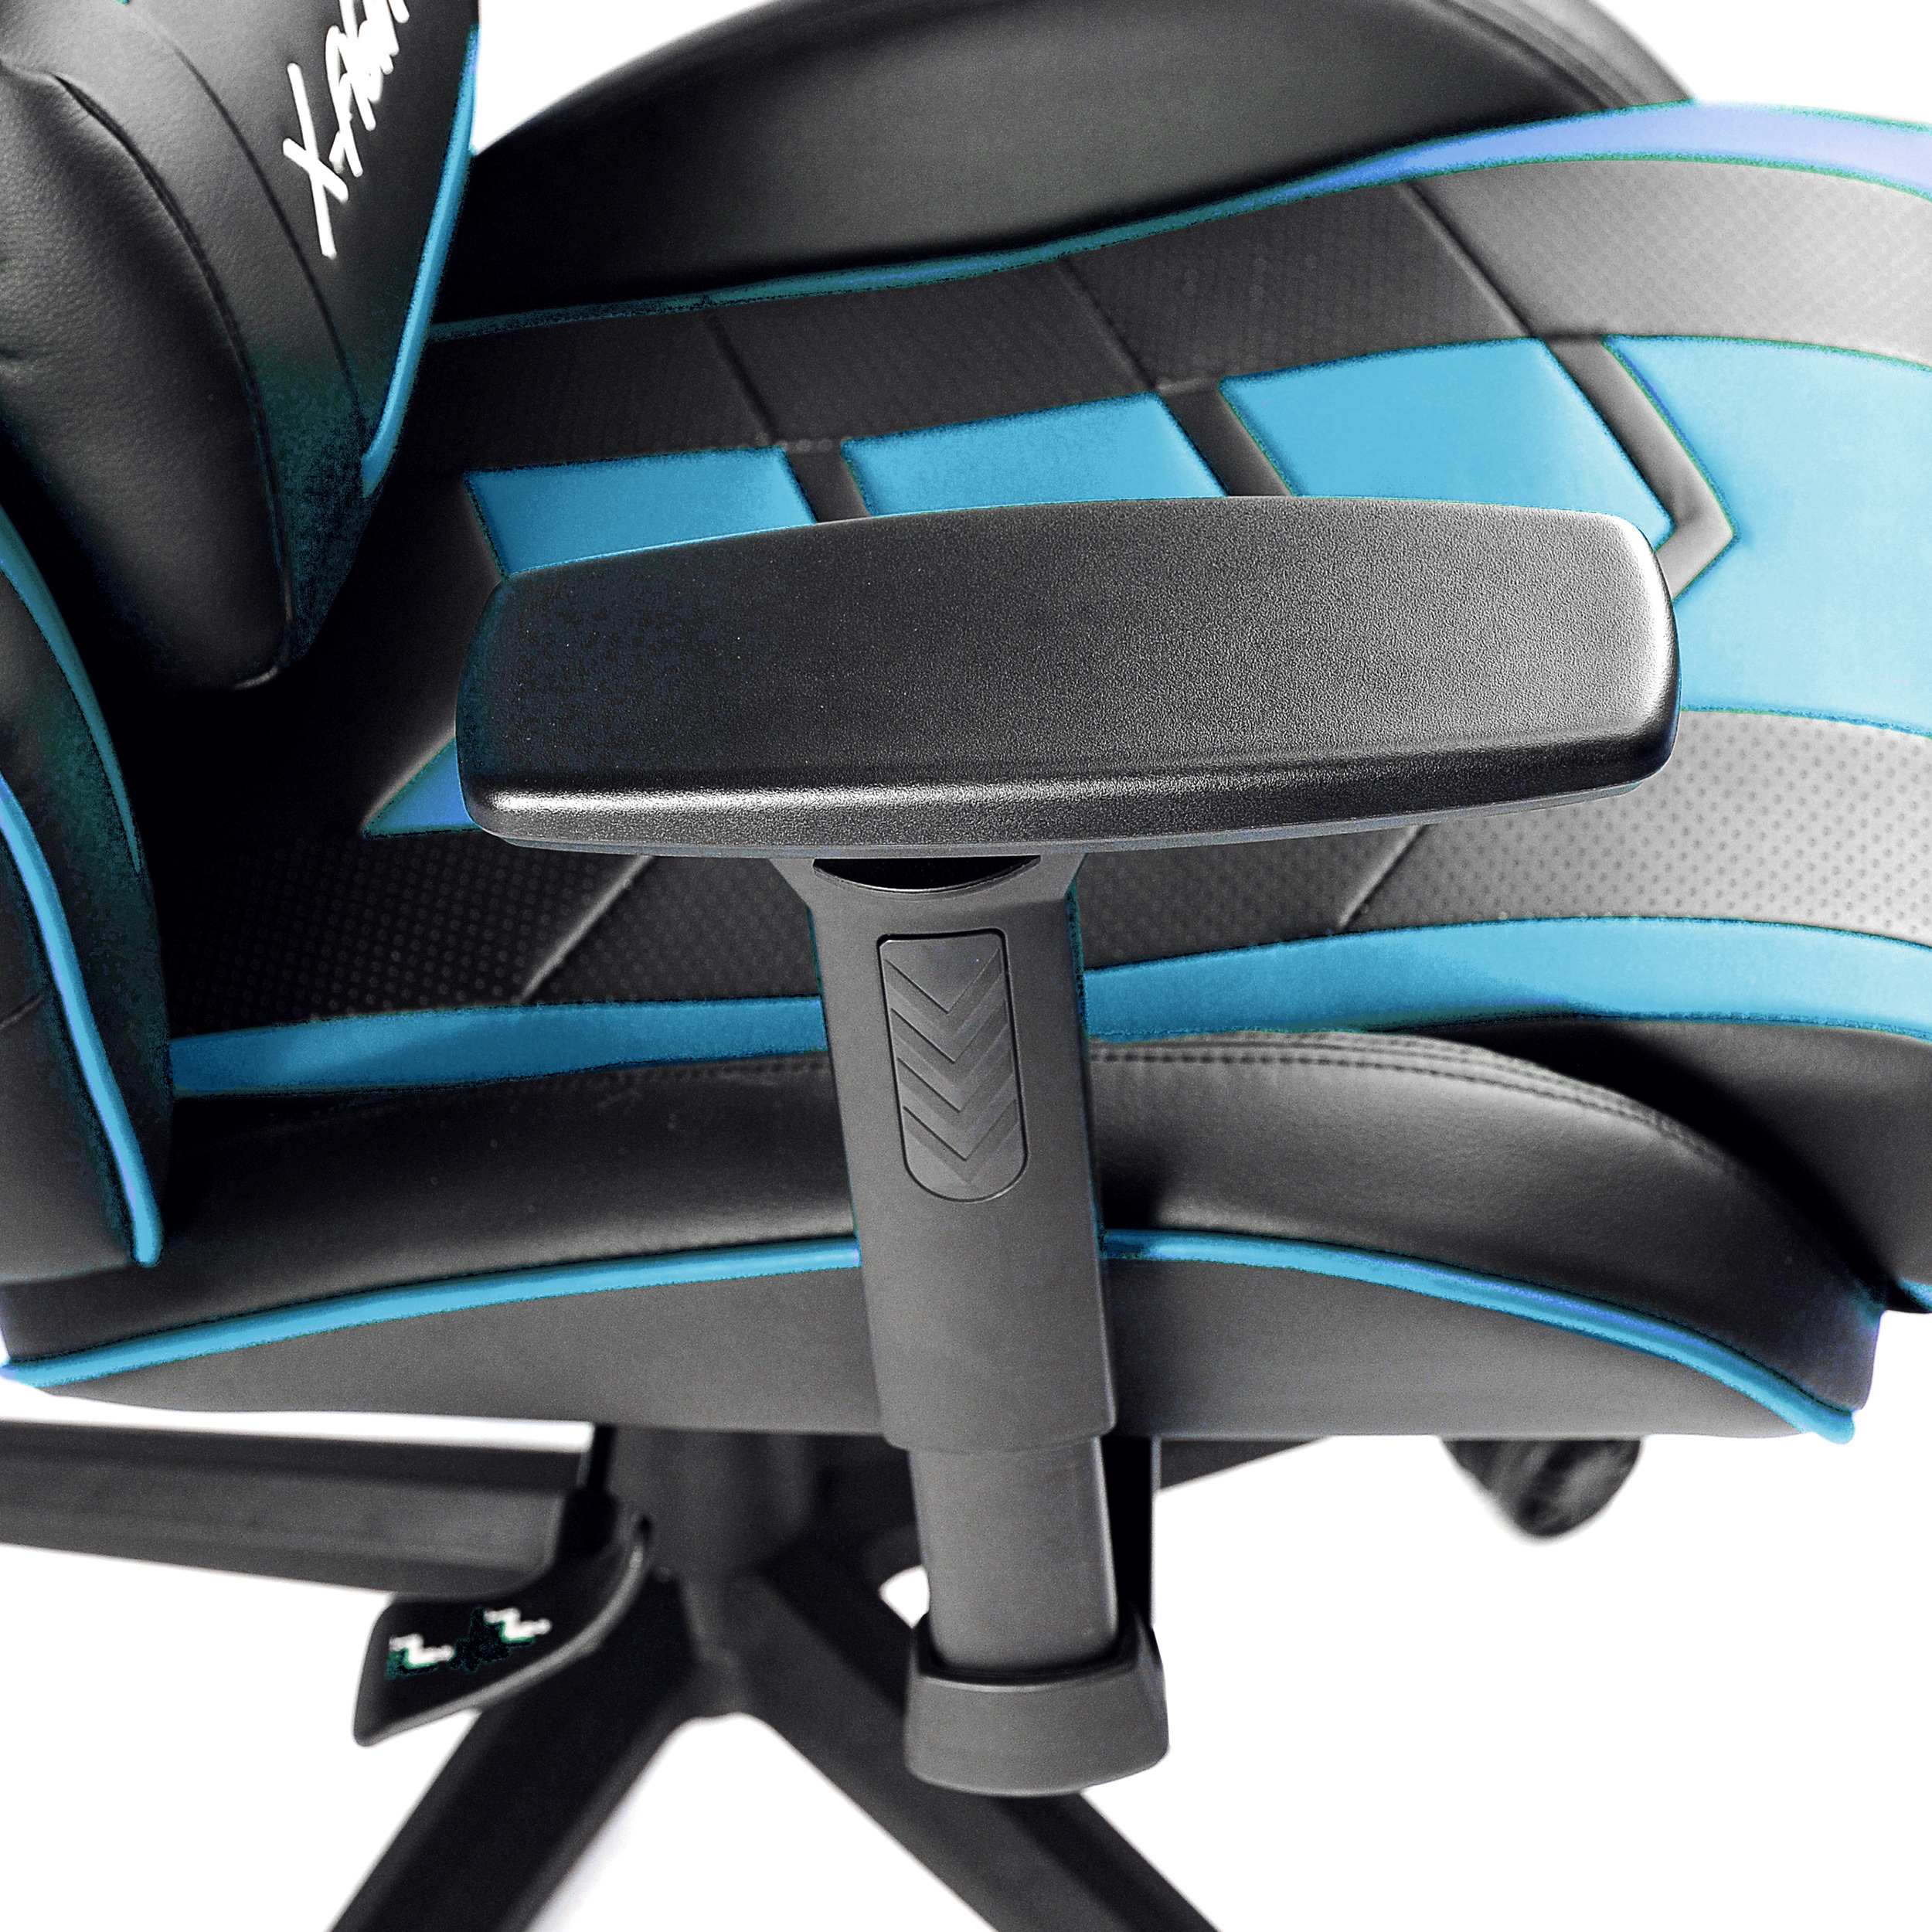 DIABLO CHAIRS GAMING STUHL NORMAL black/blue Gaming Chair, X-FIGHTER